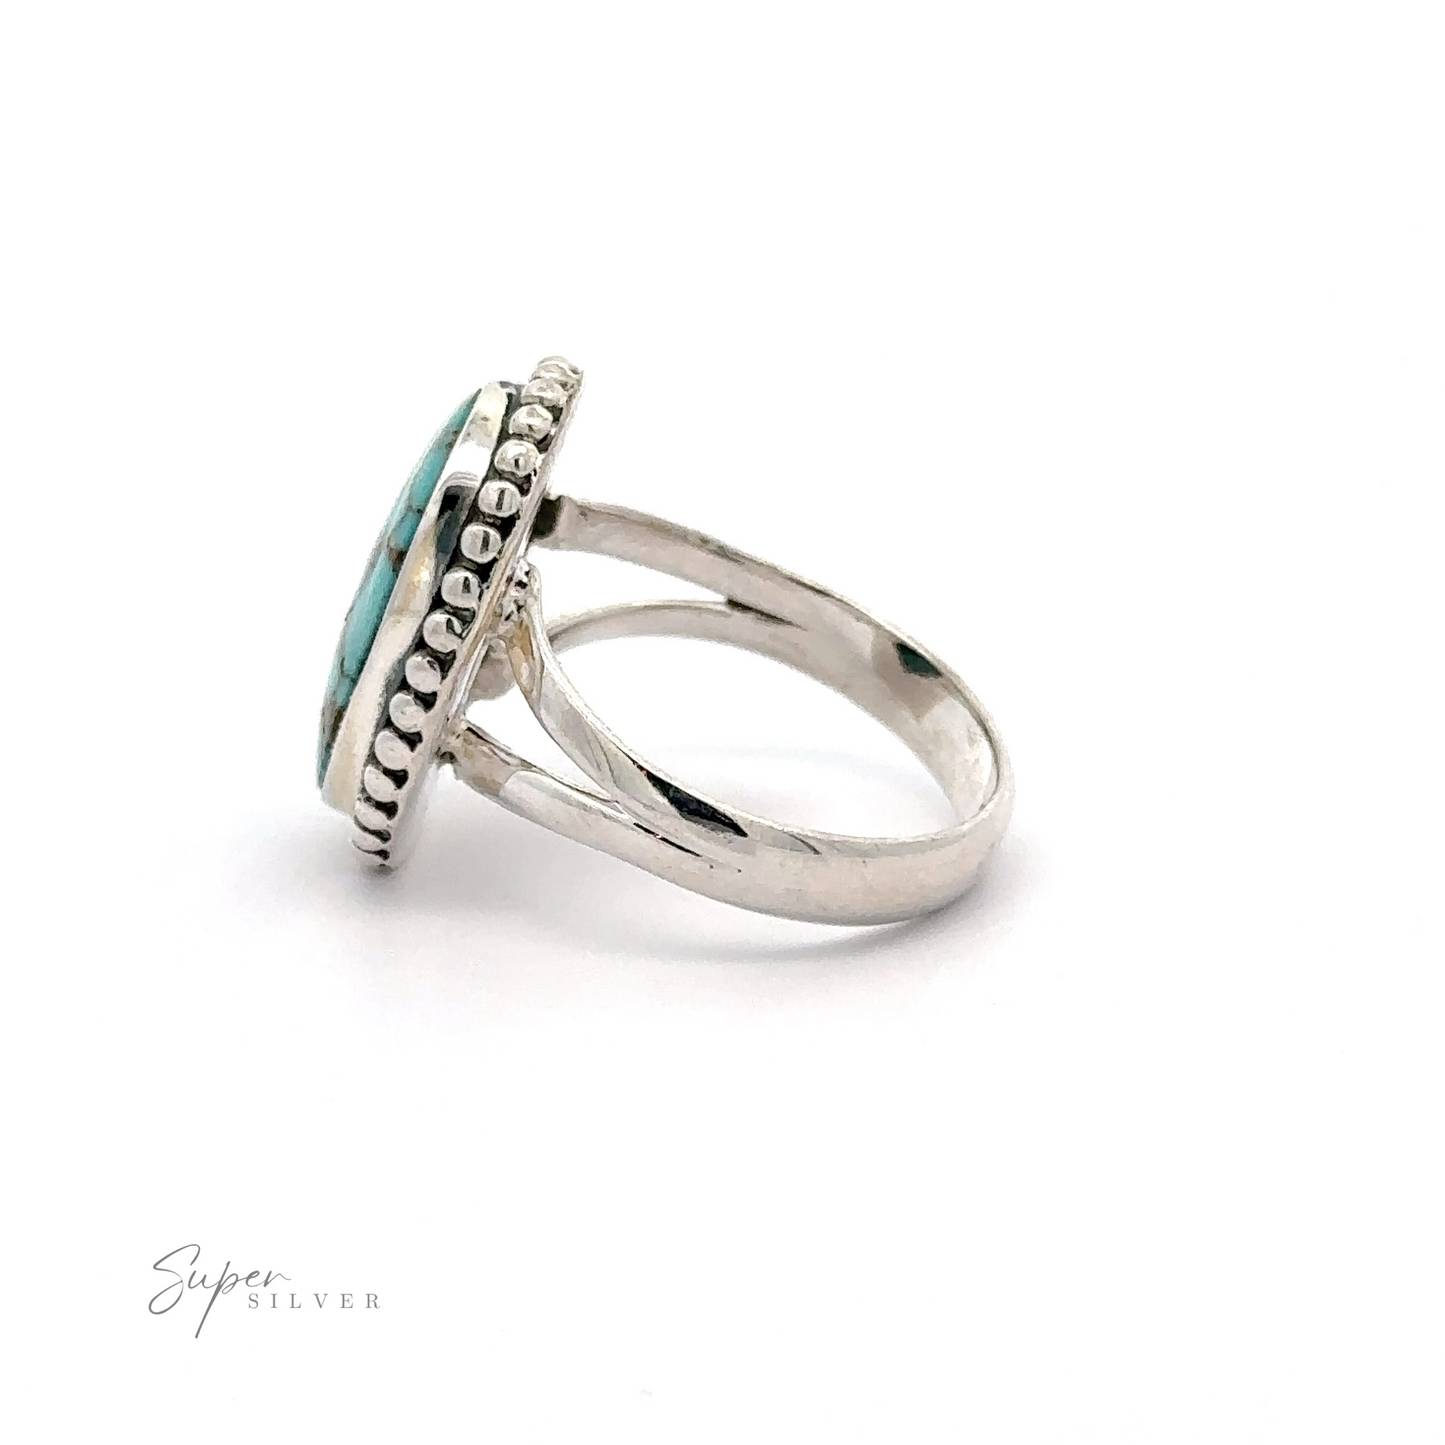 A sterling silver ring features an oval-shaped natural turquoise stone set in a beaded bezel design, labeled "Oval Natural Turquoise Ring With Ball Border" on the bottom left.